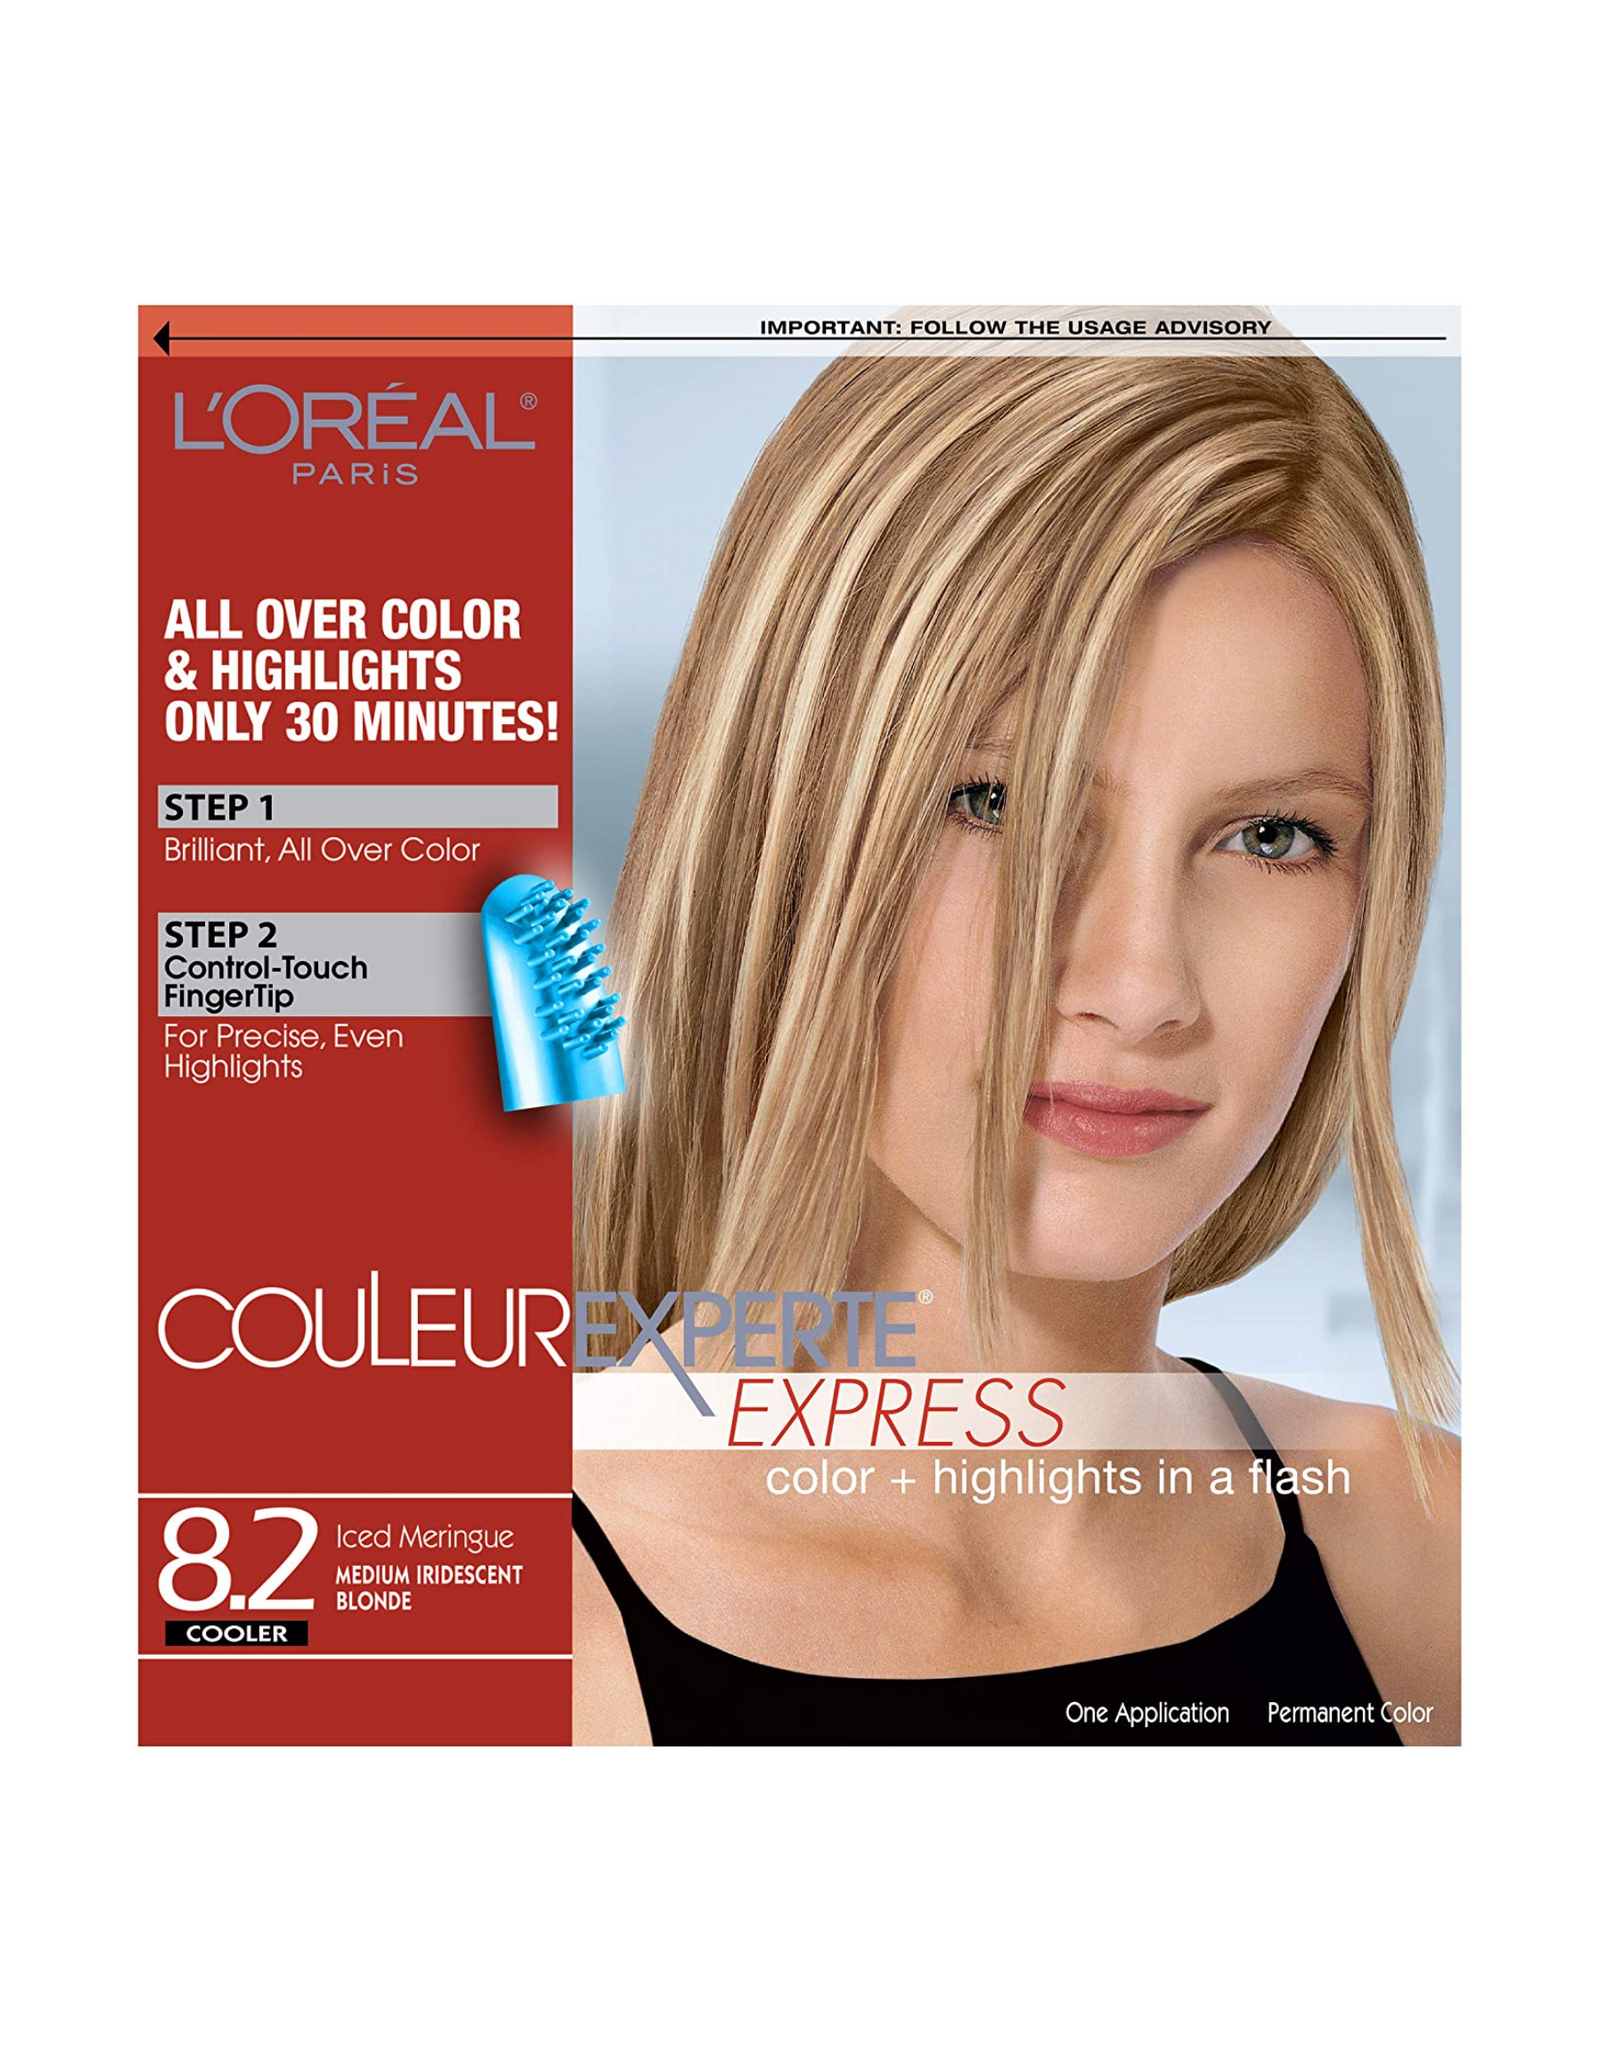 L'Oreal Paris Couleur Experte Express - Home Hair Color and Highlights Kit, Iced Meringue